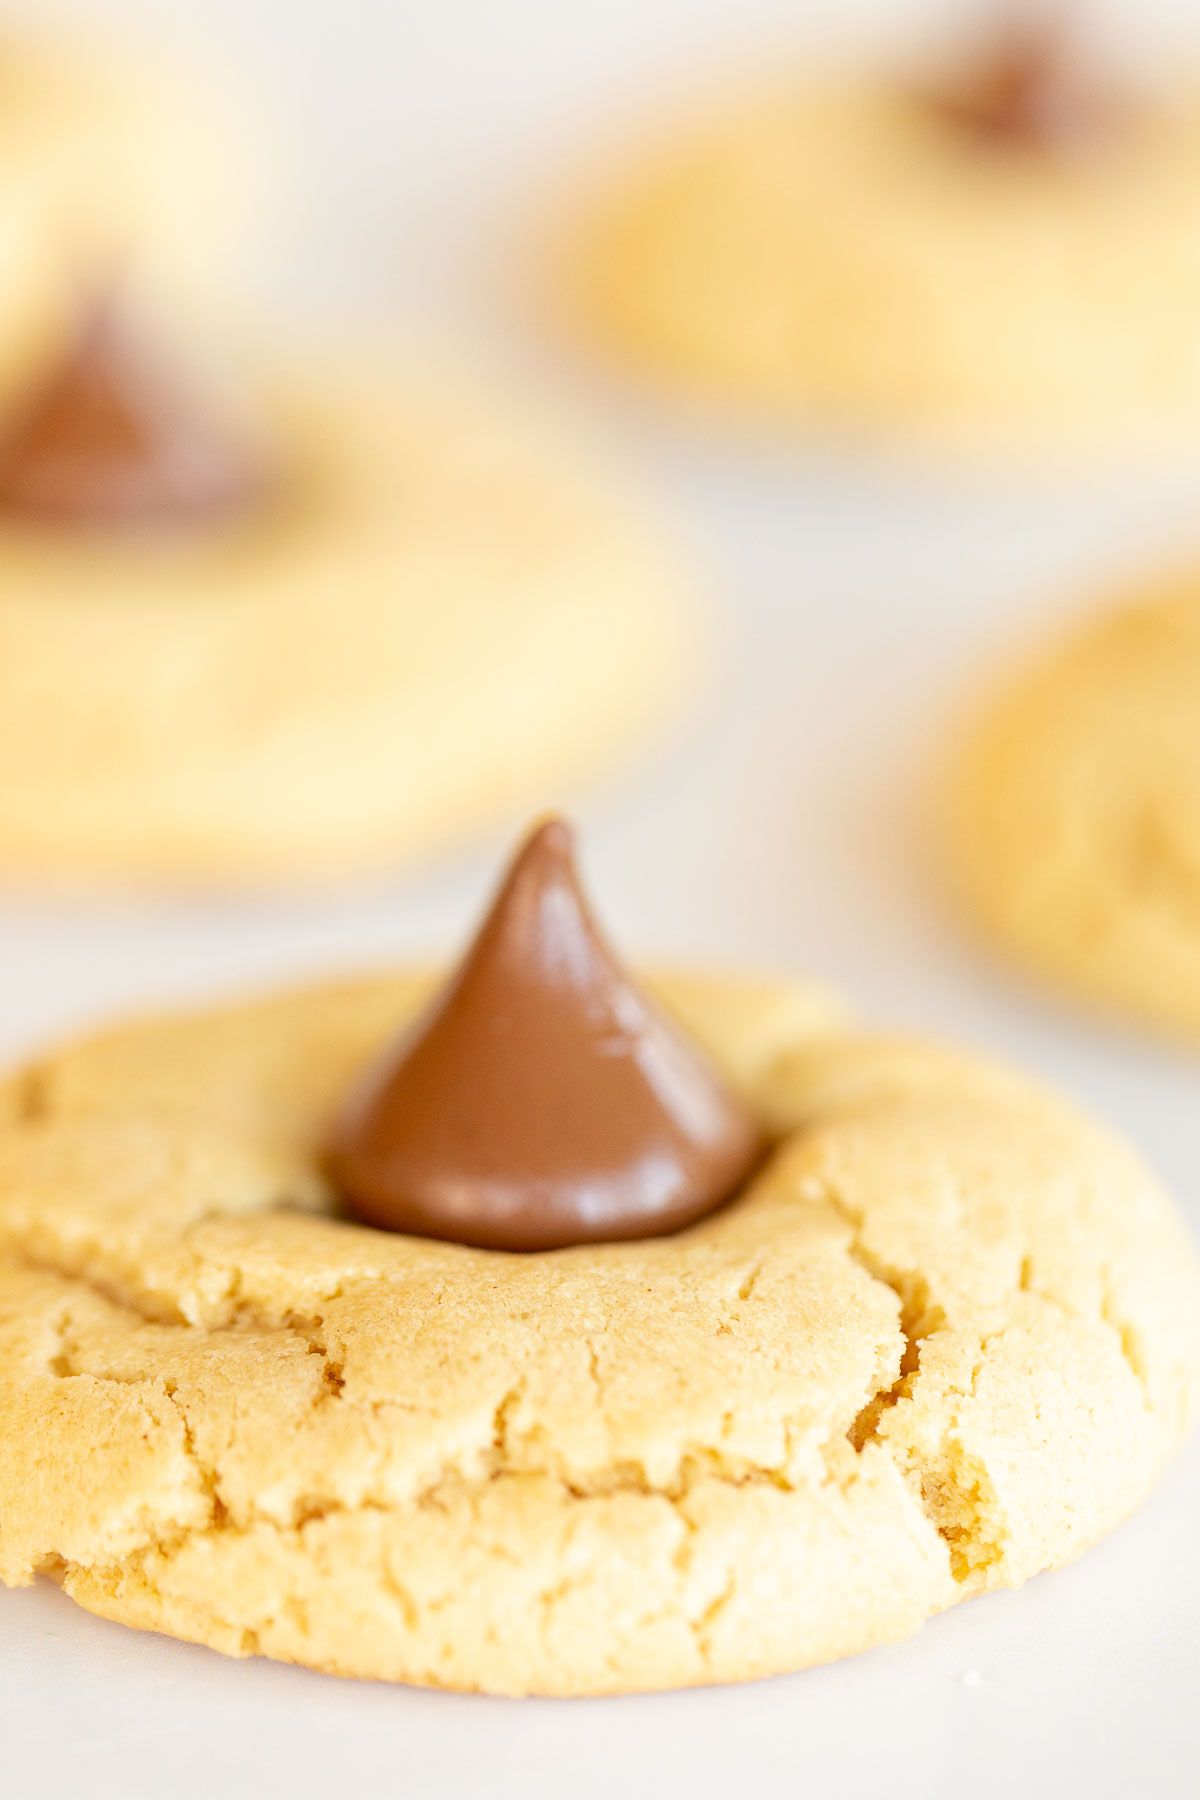 Peanut butter blossoms on a white marble surface.